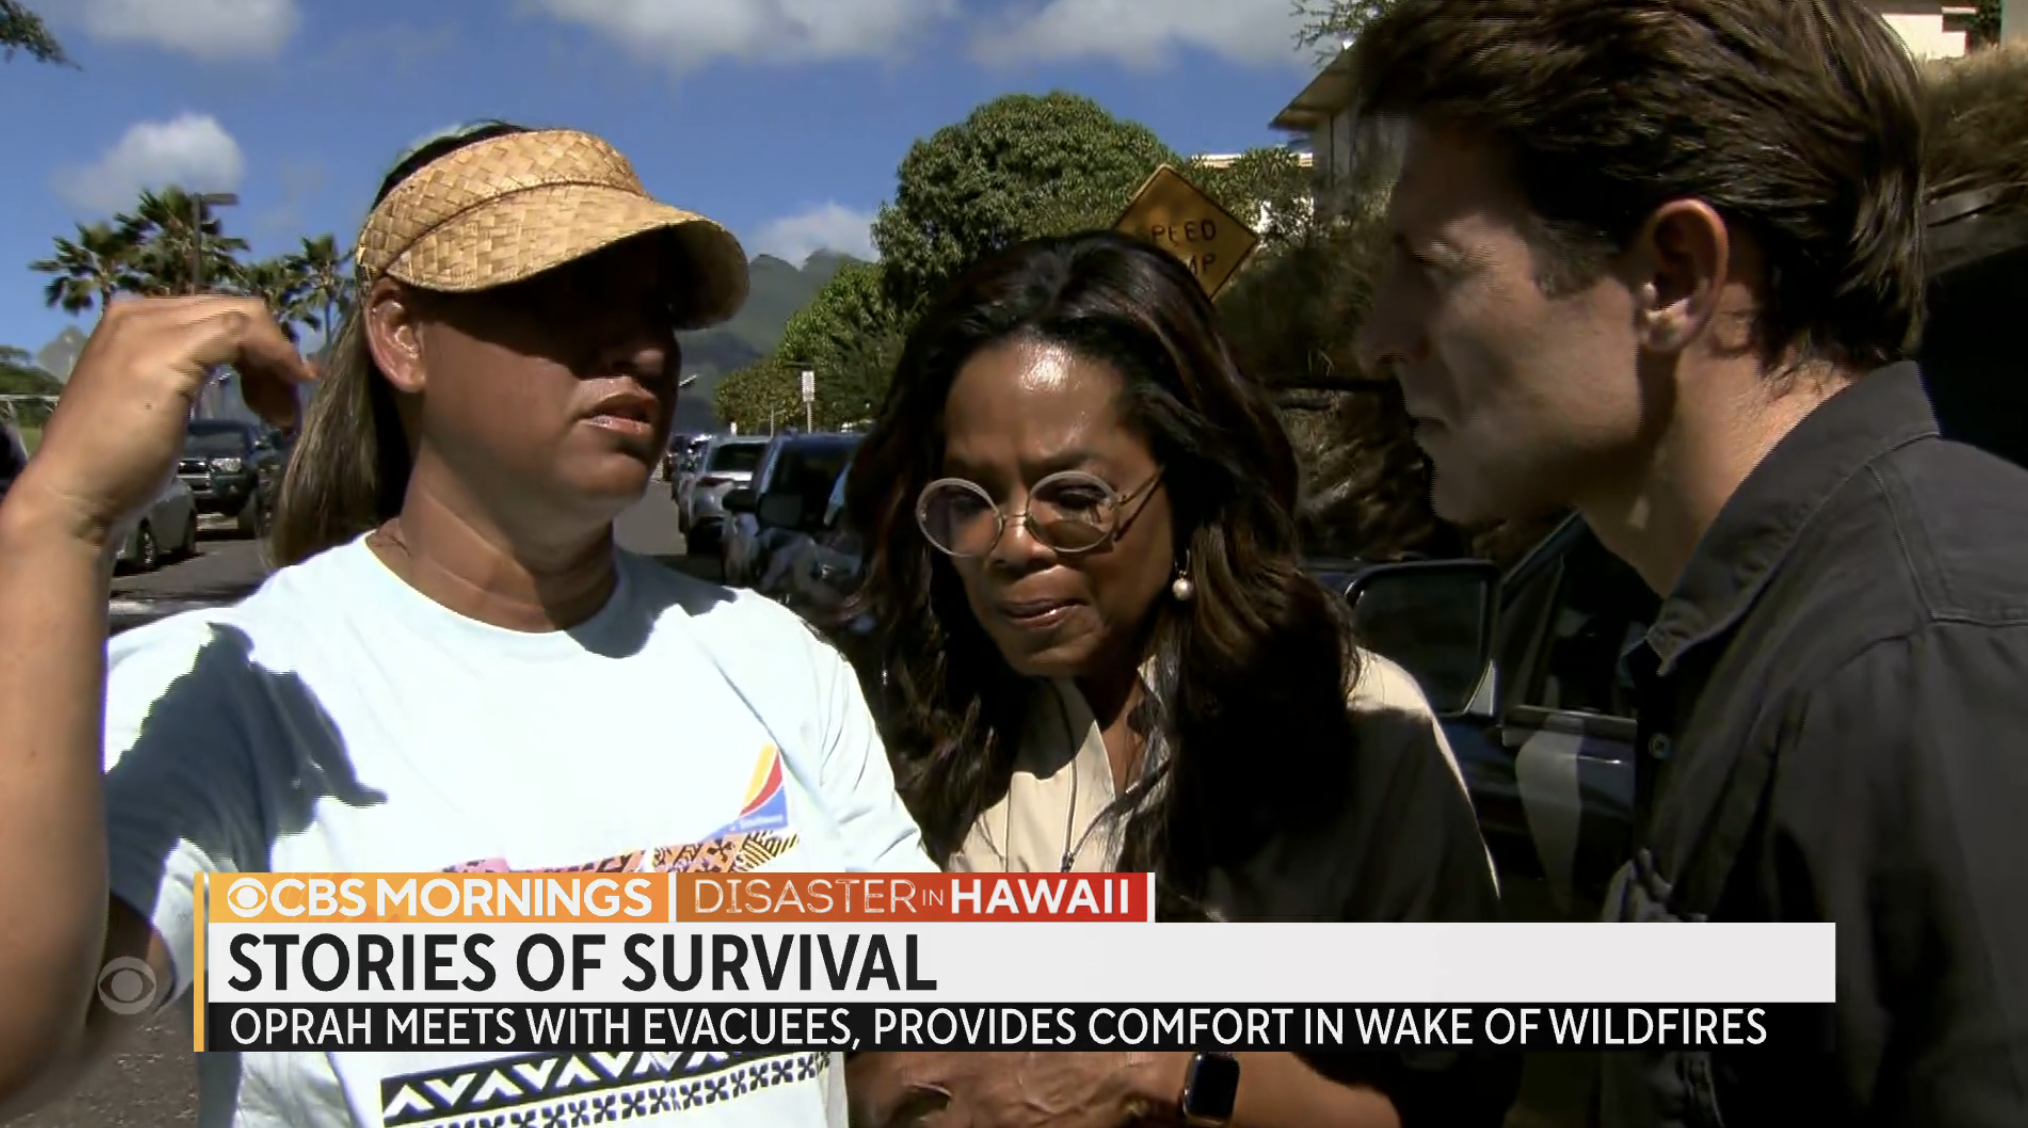 Oprah and CBS News interviewing an evacuee of the Maui wildfires